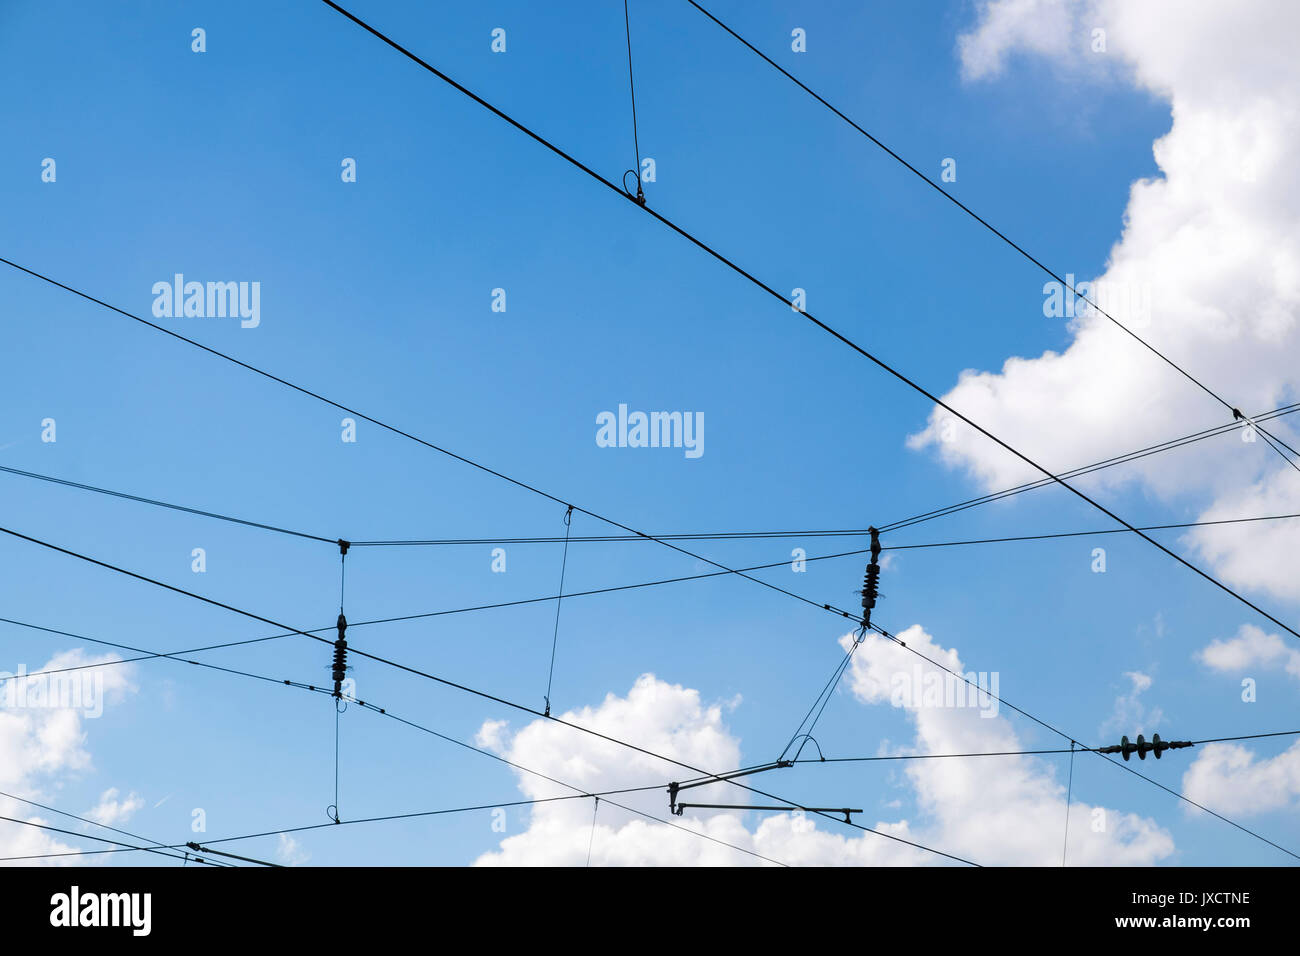 Overhead electric wires  that provide power for the railway trains Stock Photo